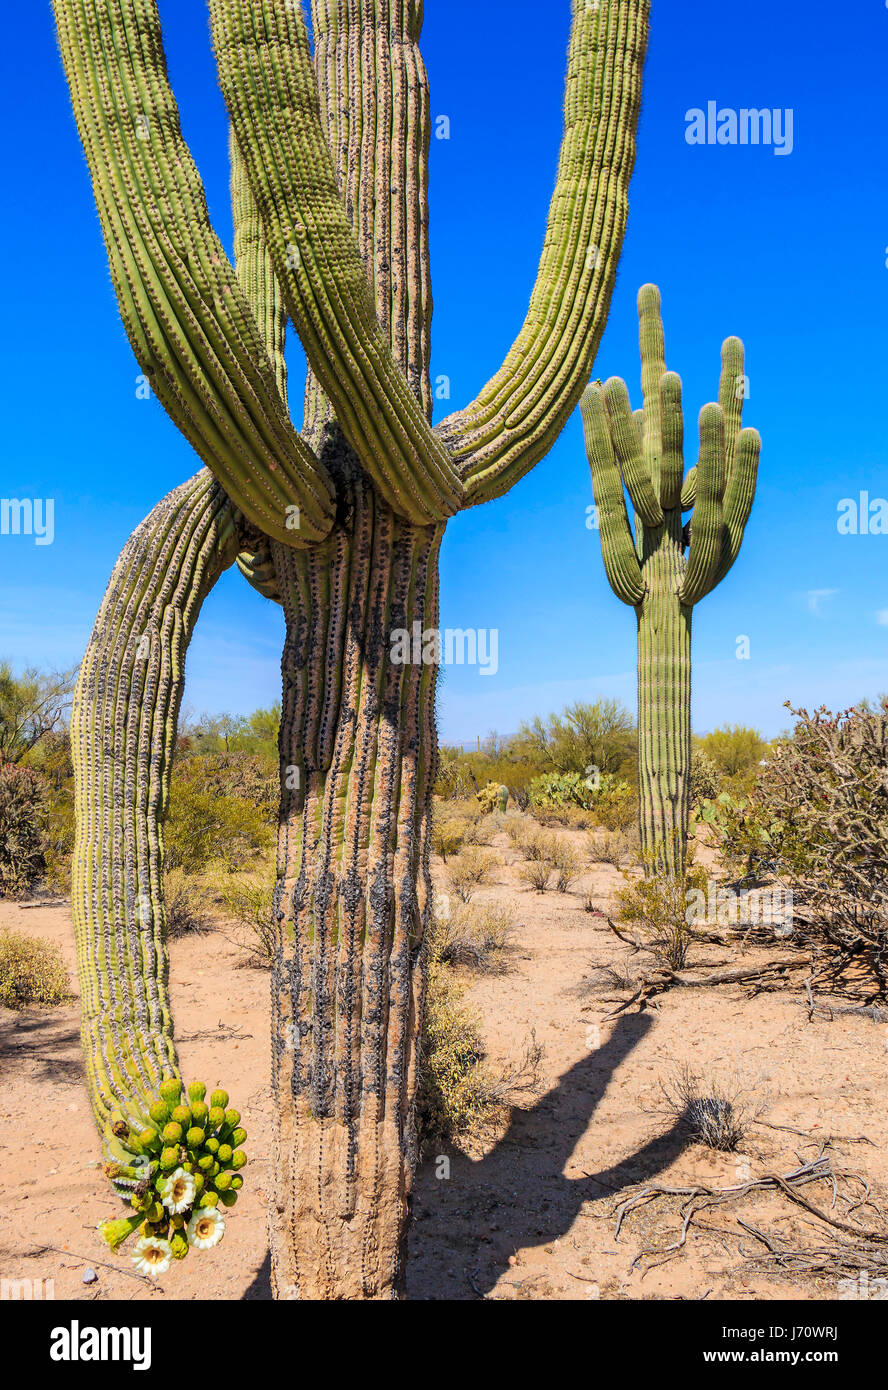 Cactus flowers bloom on saguaro cactus. The saguaro is a tree-like cactus that can grow to be over 70 feet (21 m) tall. It is native to the Sonoran De Stock Photo